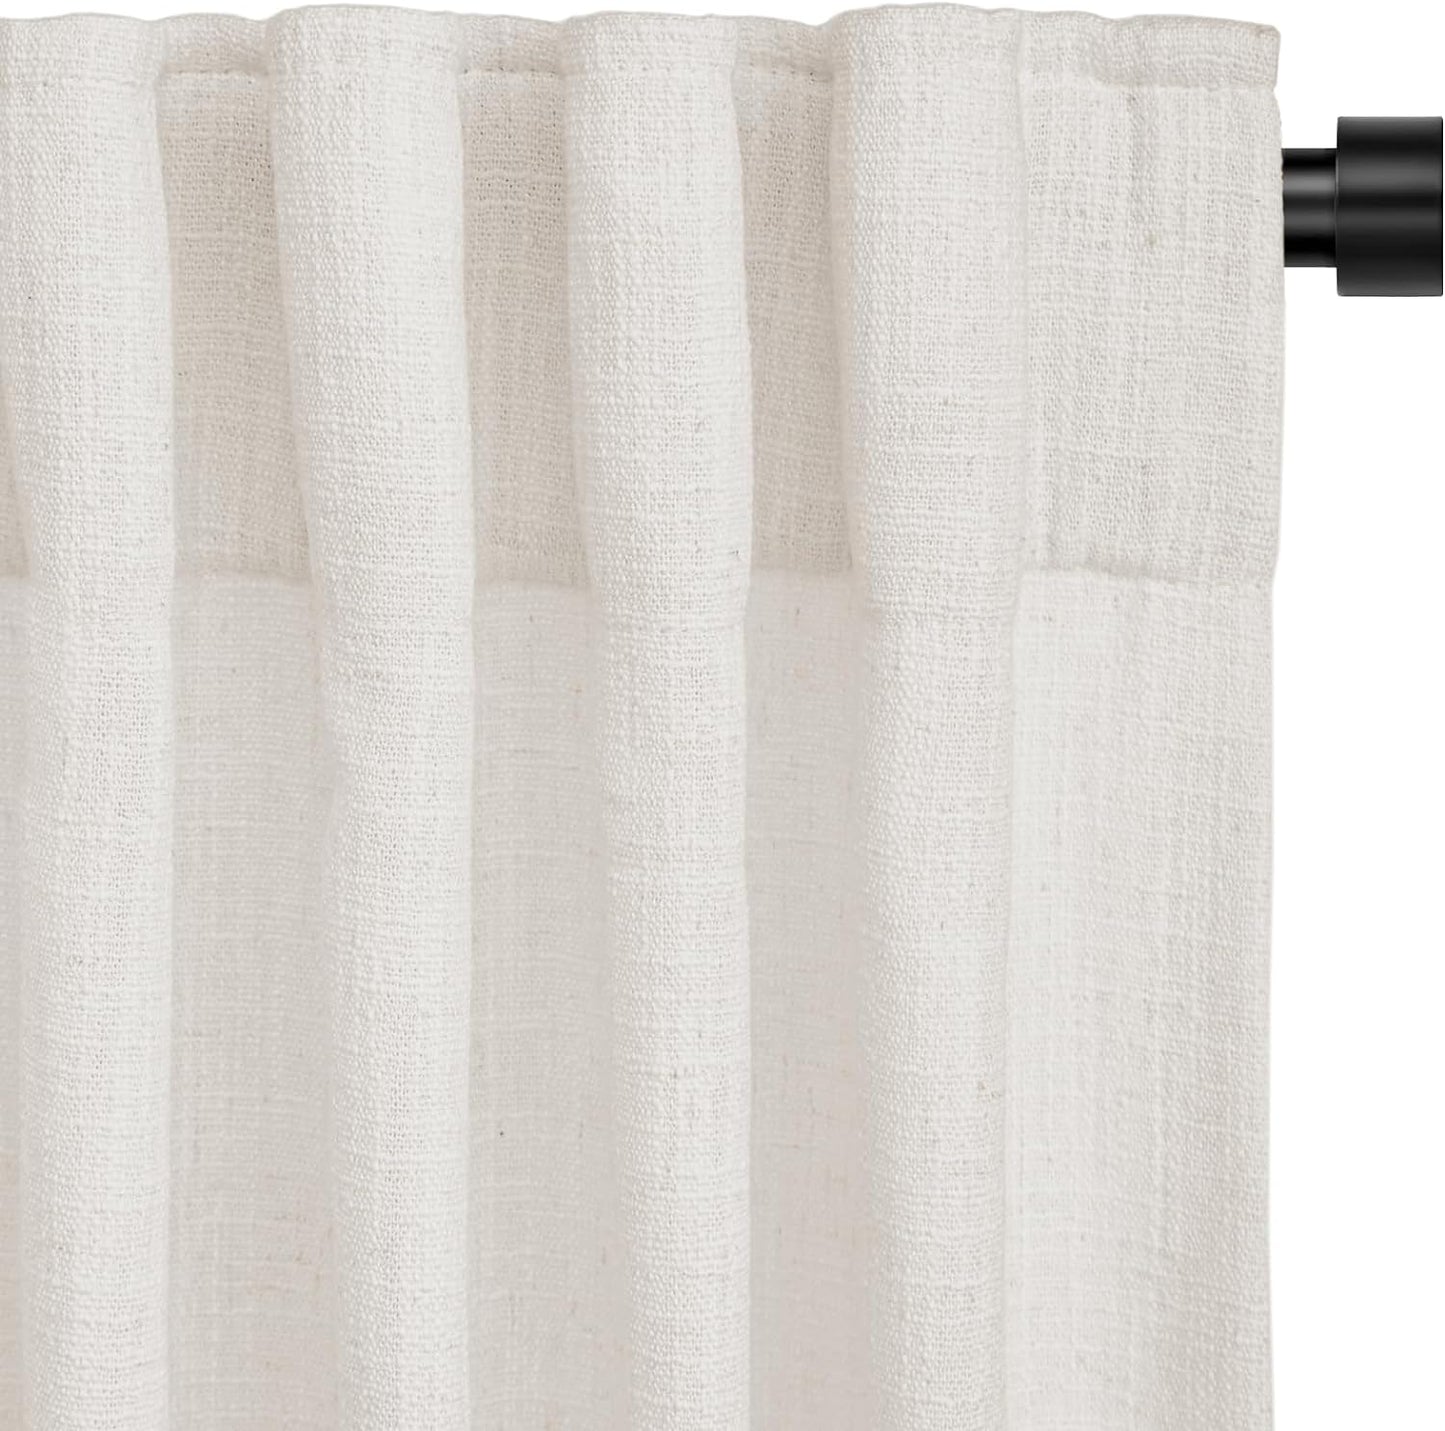 INOVADAY Beige White Linen Curtains 96 Inches Long for Living Room Bedroom, Back Tab Sheer Privacy Curtains 96 Inch Length 2 Panels, Light Filtering Farmhouse Curtains & Drapes Cream Colored, W50Xl96  INOVADAY 04 Ivory 50"W X96"L 